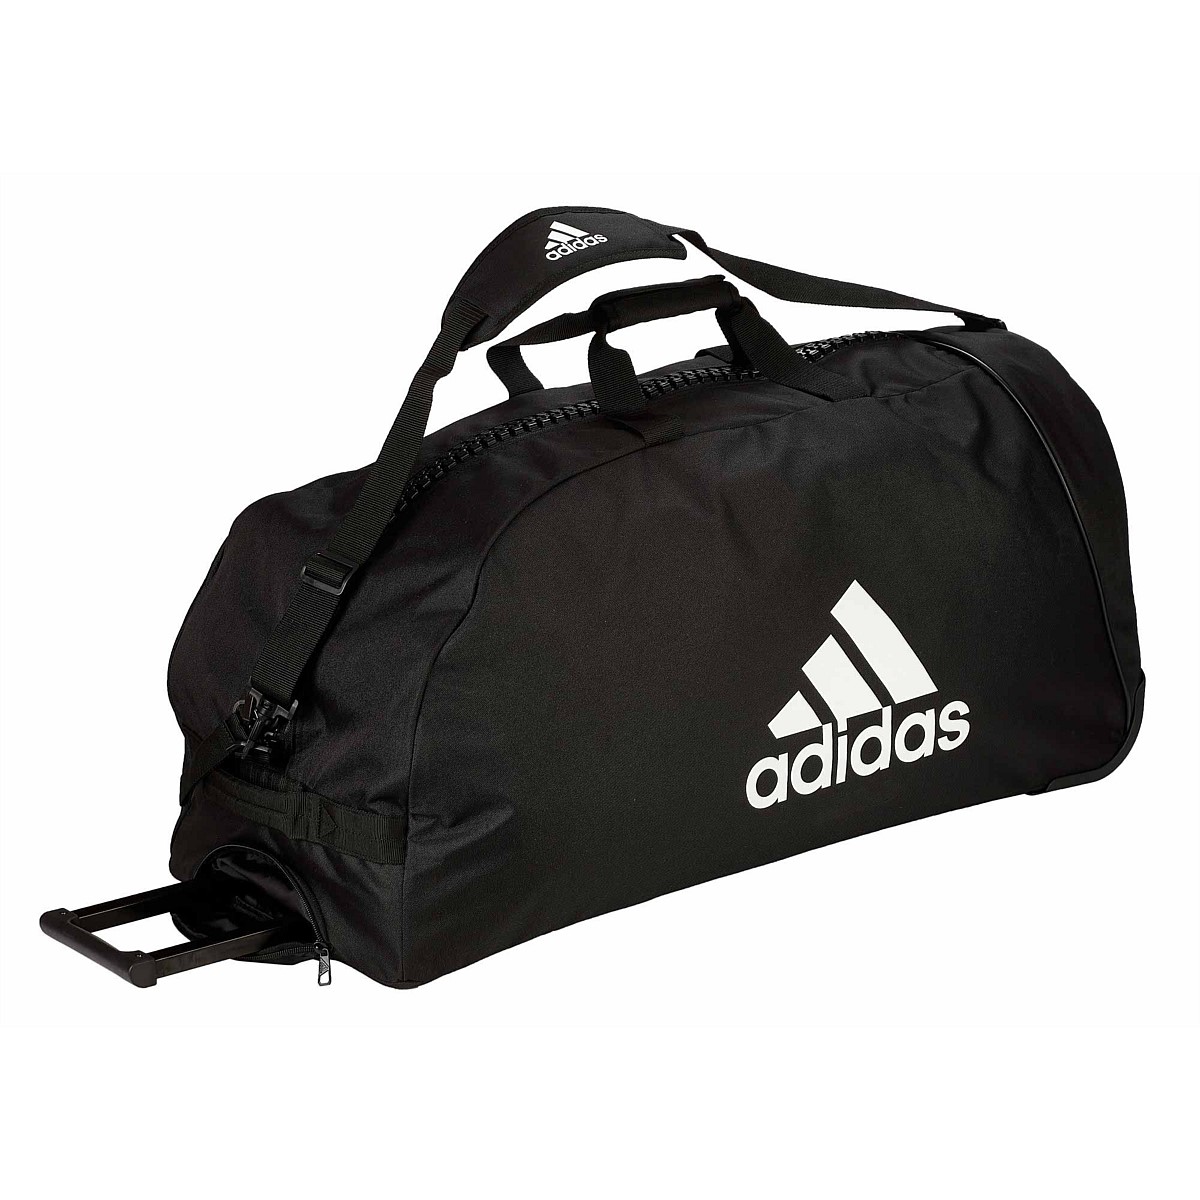 Adidas Online | Air New Zealand's Airpoints™ Store